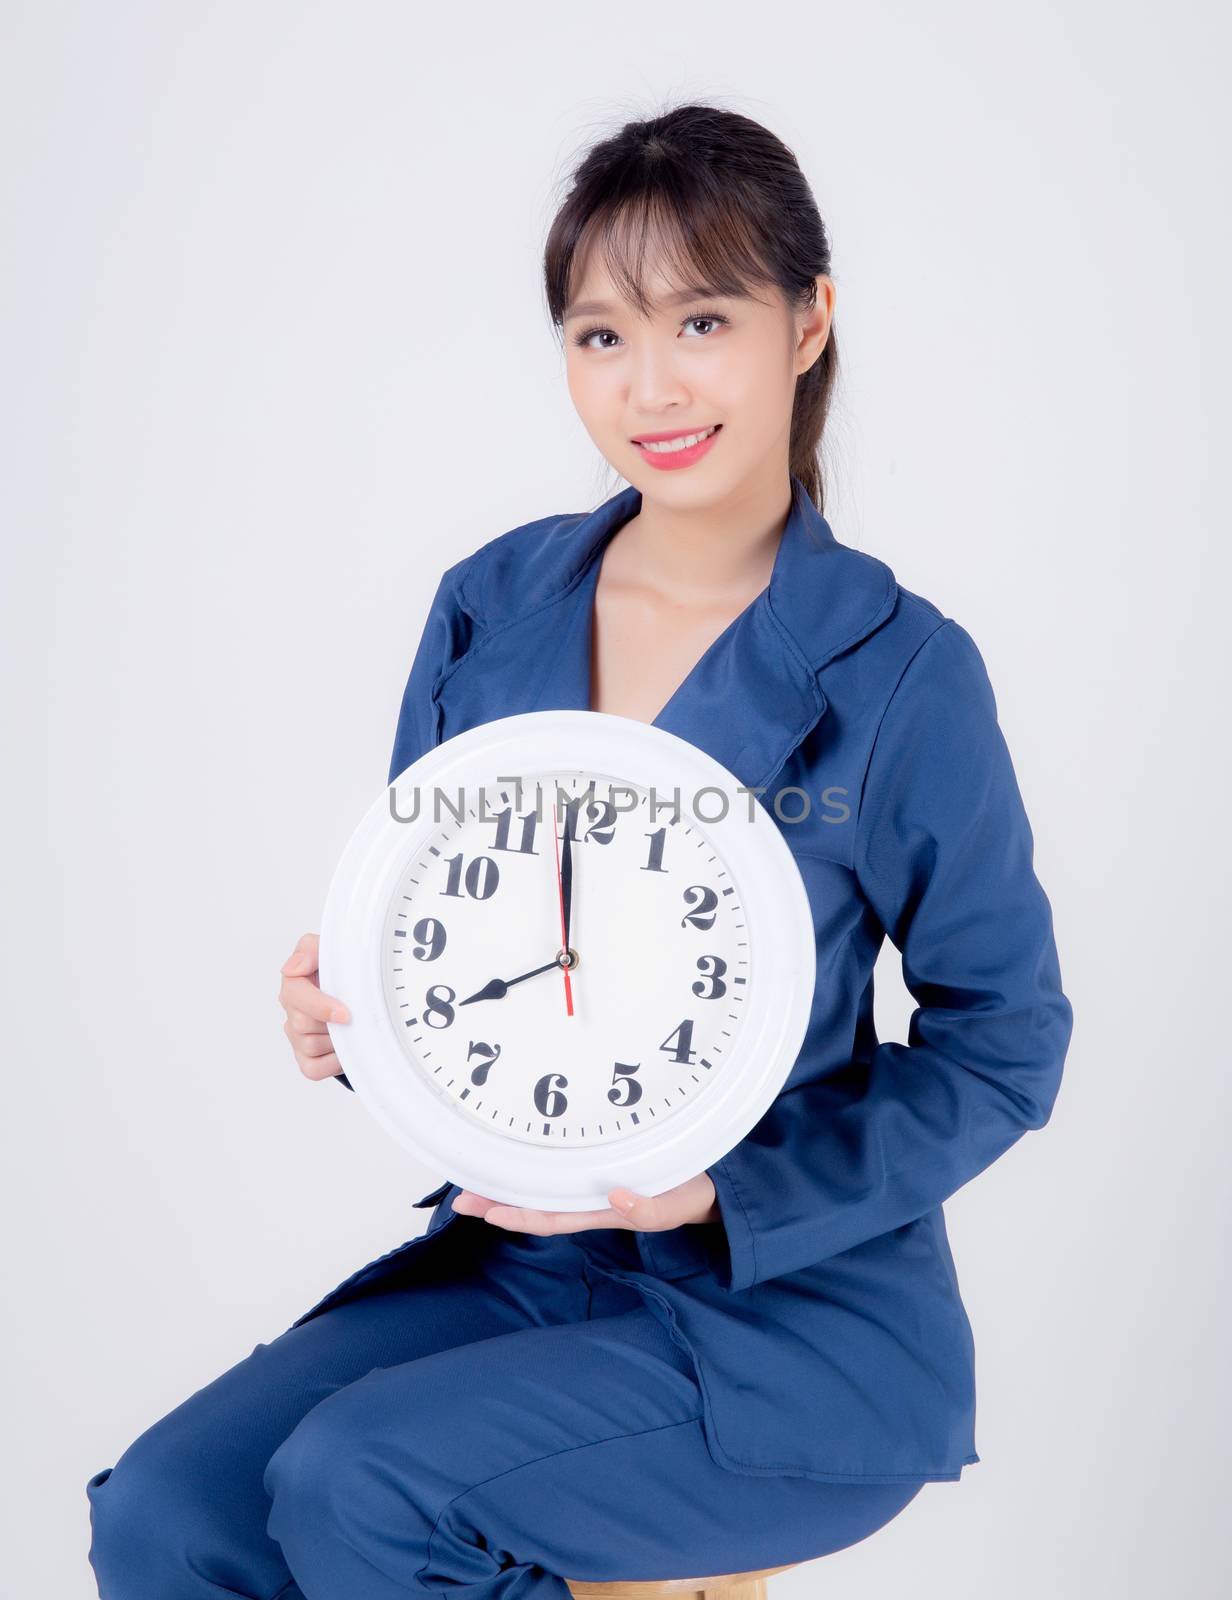 Beautiful portrait young business asian woman smiling holding clock isolated on white background, happy businesswoman schedule time of work, confident girl showing watch, management time concept.